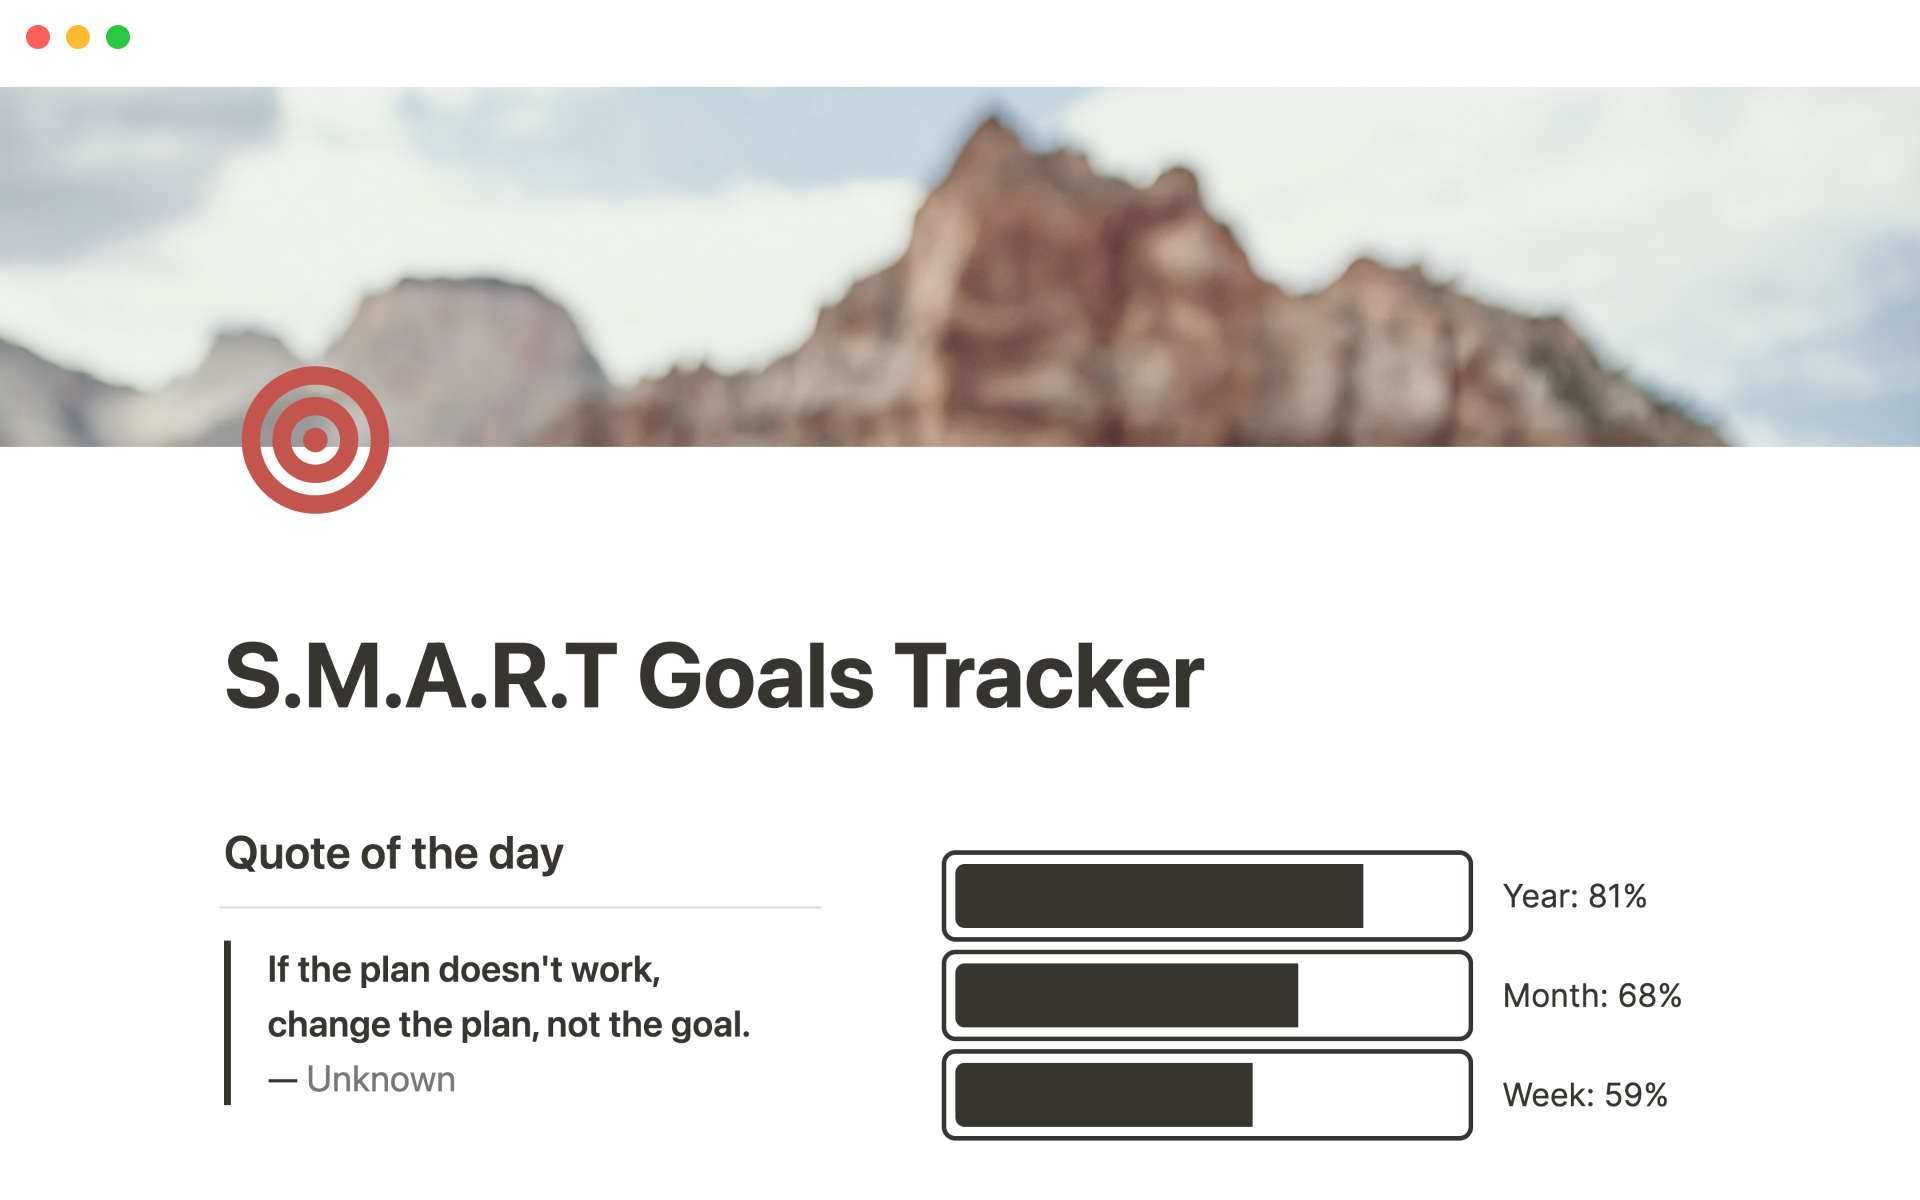 Set goals, evaluate them, and track the habits needed to achieve them.